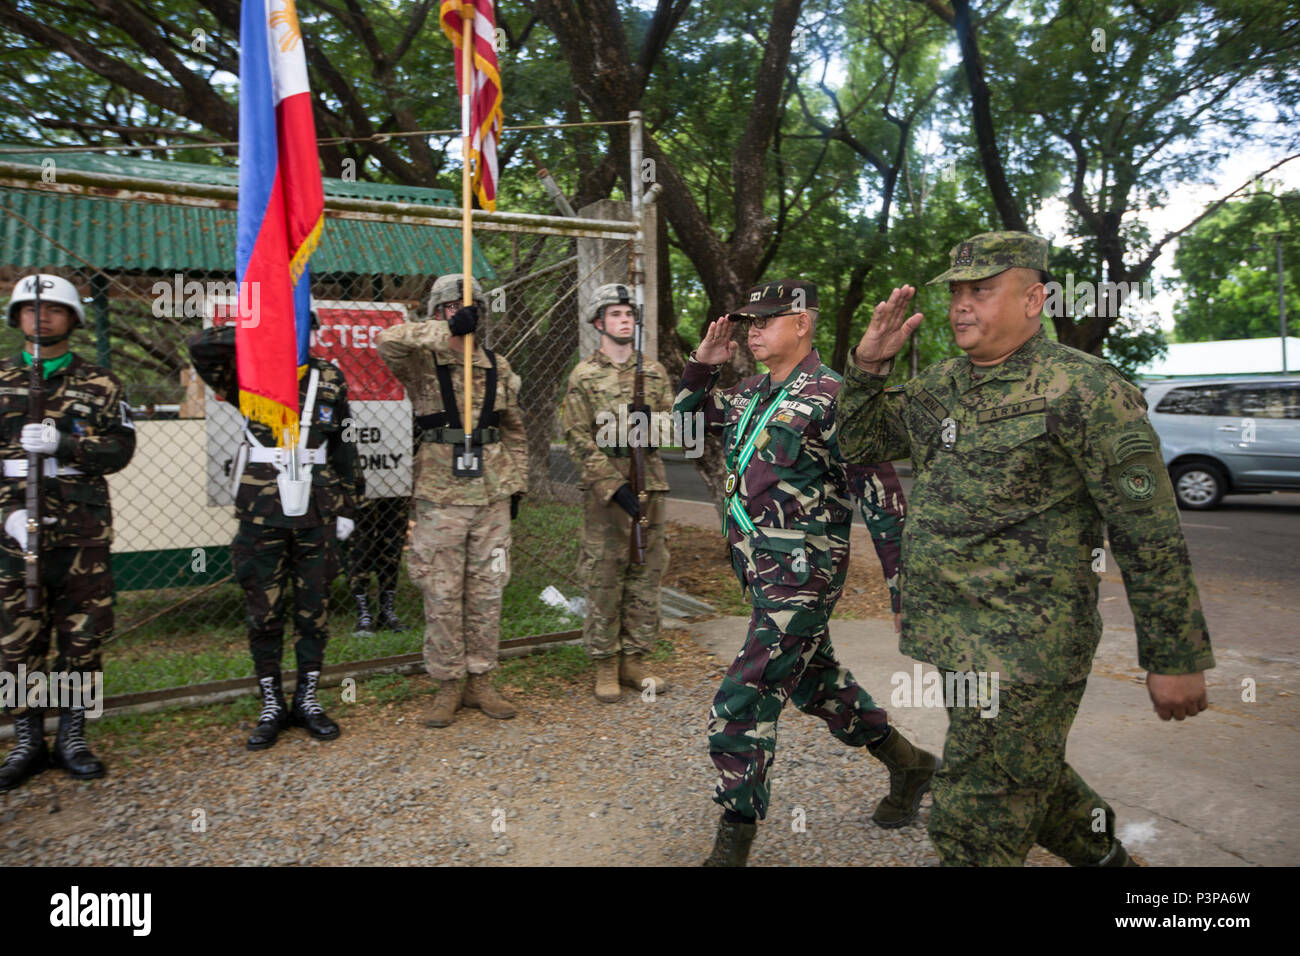 A Philippine and U.S. combined color guard greet Philippine Army Maj. Gen. Angelito De Leon, left, and Col. Laurence Mina during the opening ceremony of Balikatan 2017 at Fort Magsaysay in Santa Rosa, Nueva Ecija, May 8, 2017. De Leon is the commander of 7th Infantry Division and Mina is Deputy Assistant Chief of Staff for Training and Education Staff, Philippine Army. Balikatan is an annual U.S.-Philippine bilateral military exercise focused on a variety of missions including humanitarian and disaster relief, counterterrorism, and other combined military operations. Stock Photo